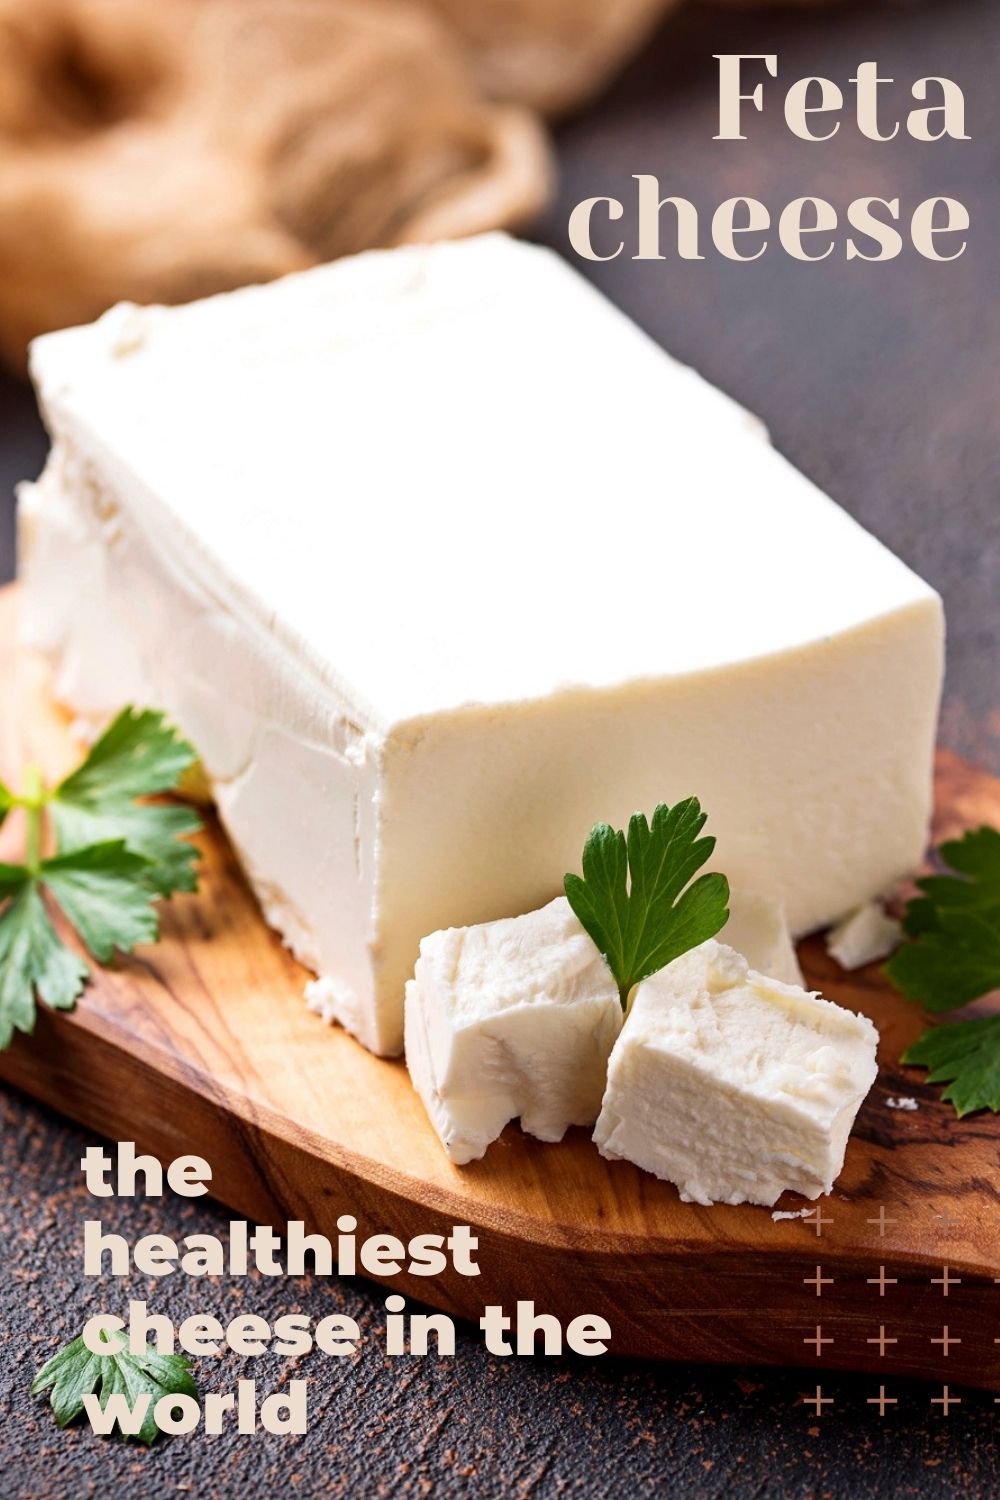 Feta cheese: the healthiest cheese in the world